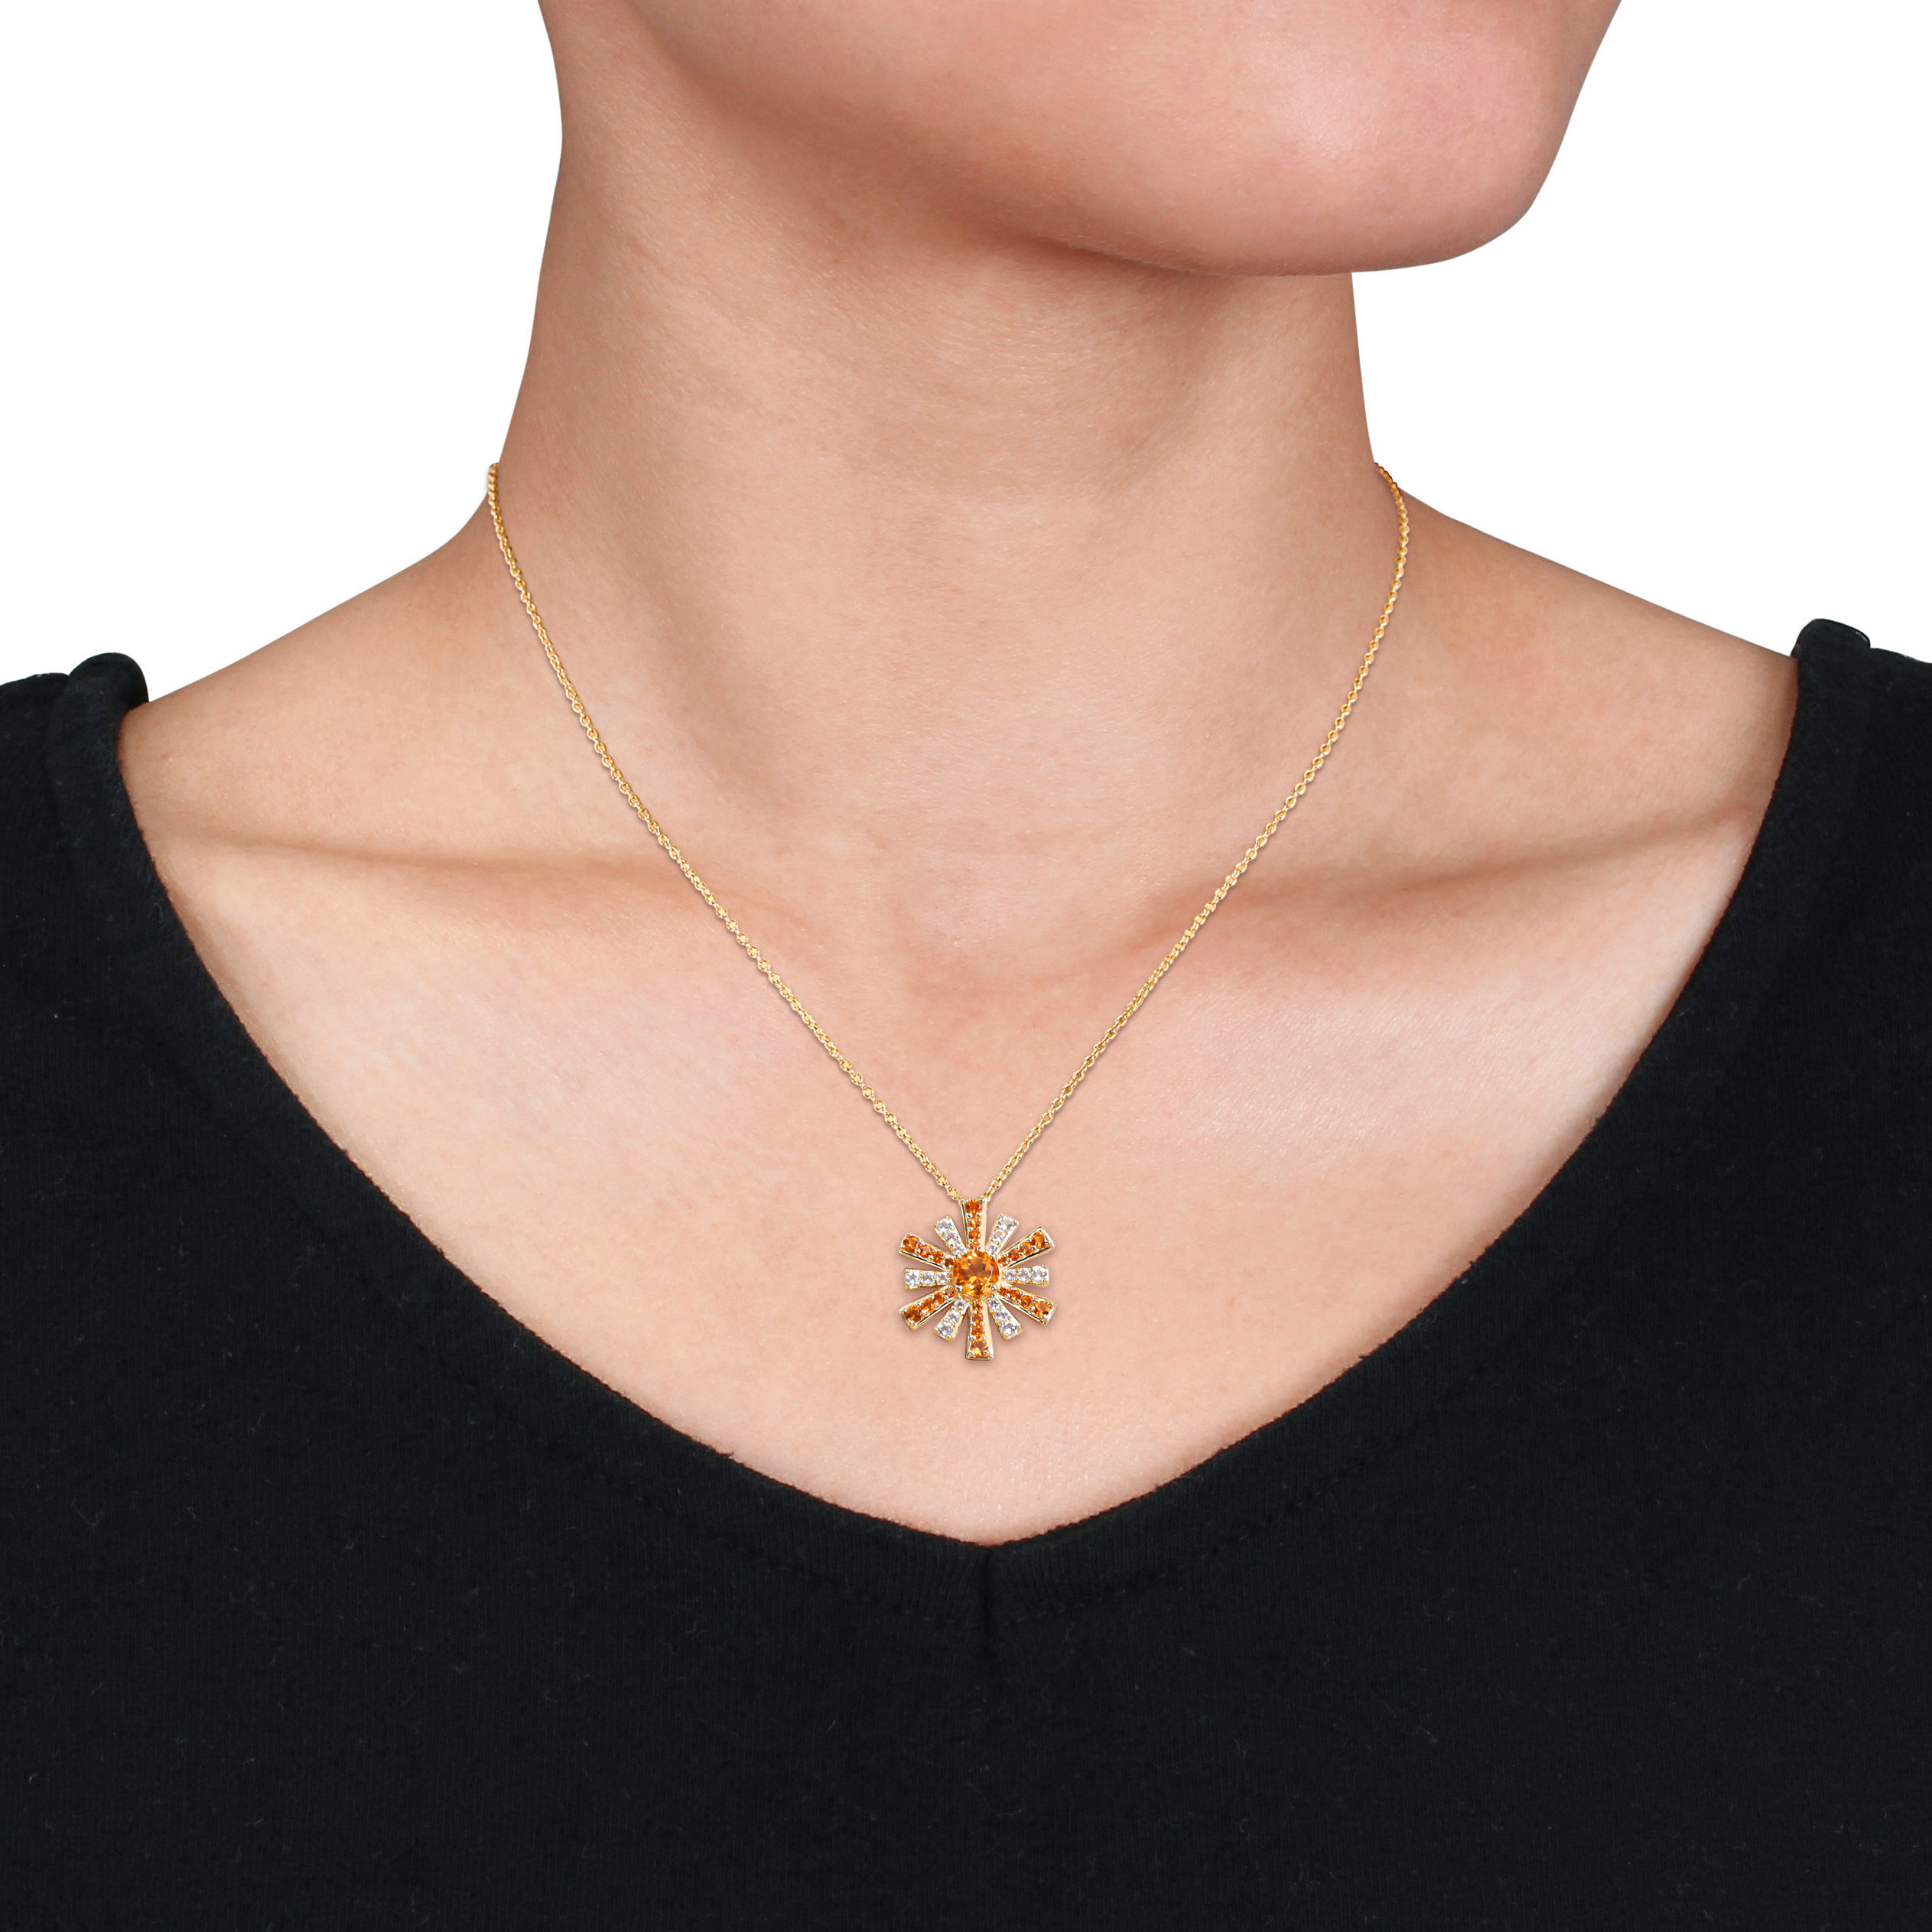 2 CT TGW Madeira Citrine and White Topaz Starburst Pendant with Chain in 18k Yellow Gold Plated Sterling Silver